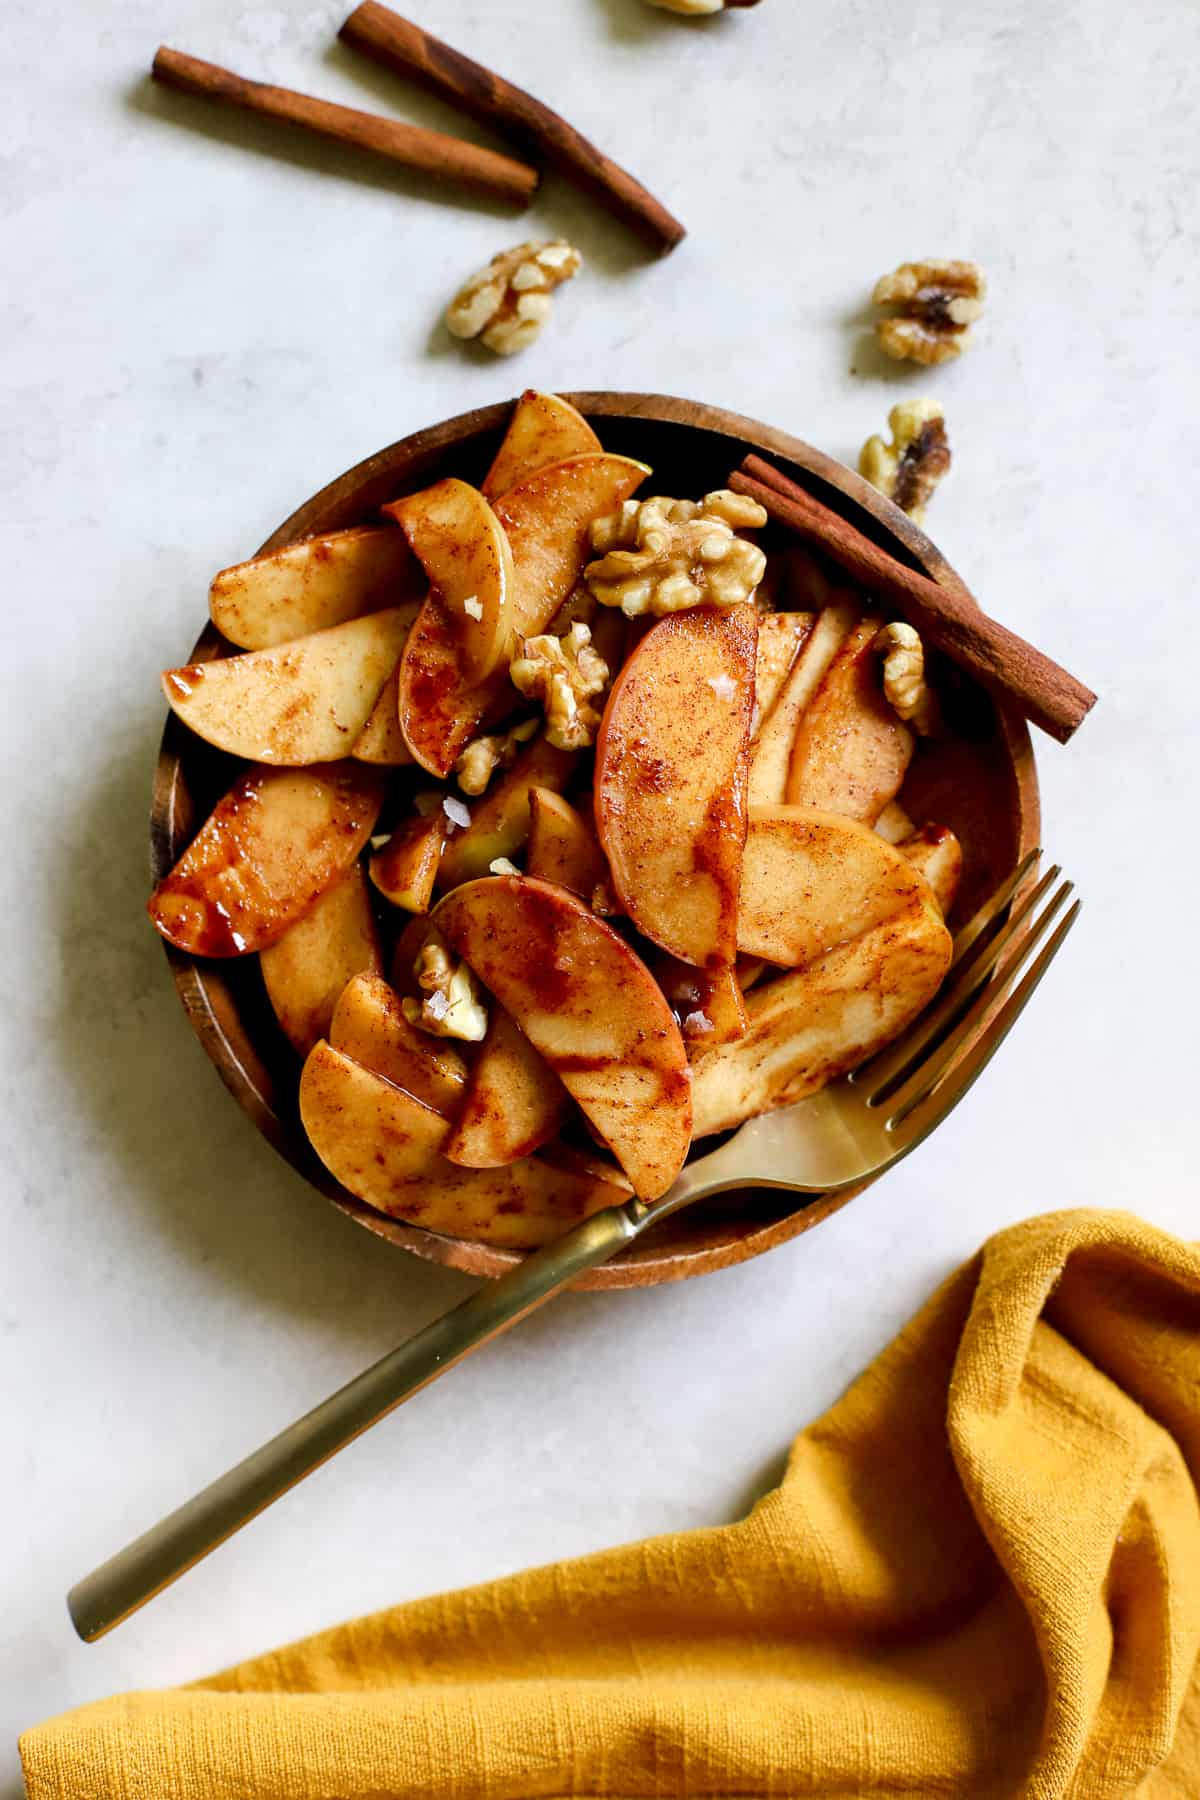 Simple sautéed apples on small wooden plate, topped with walnuts and flaky salt, with a golden fork on gray/white surface with golden yellow linen and cinnamon sticks on side.